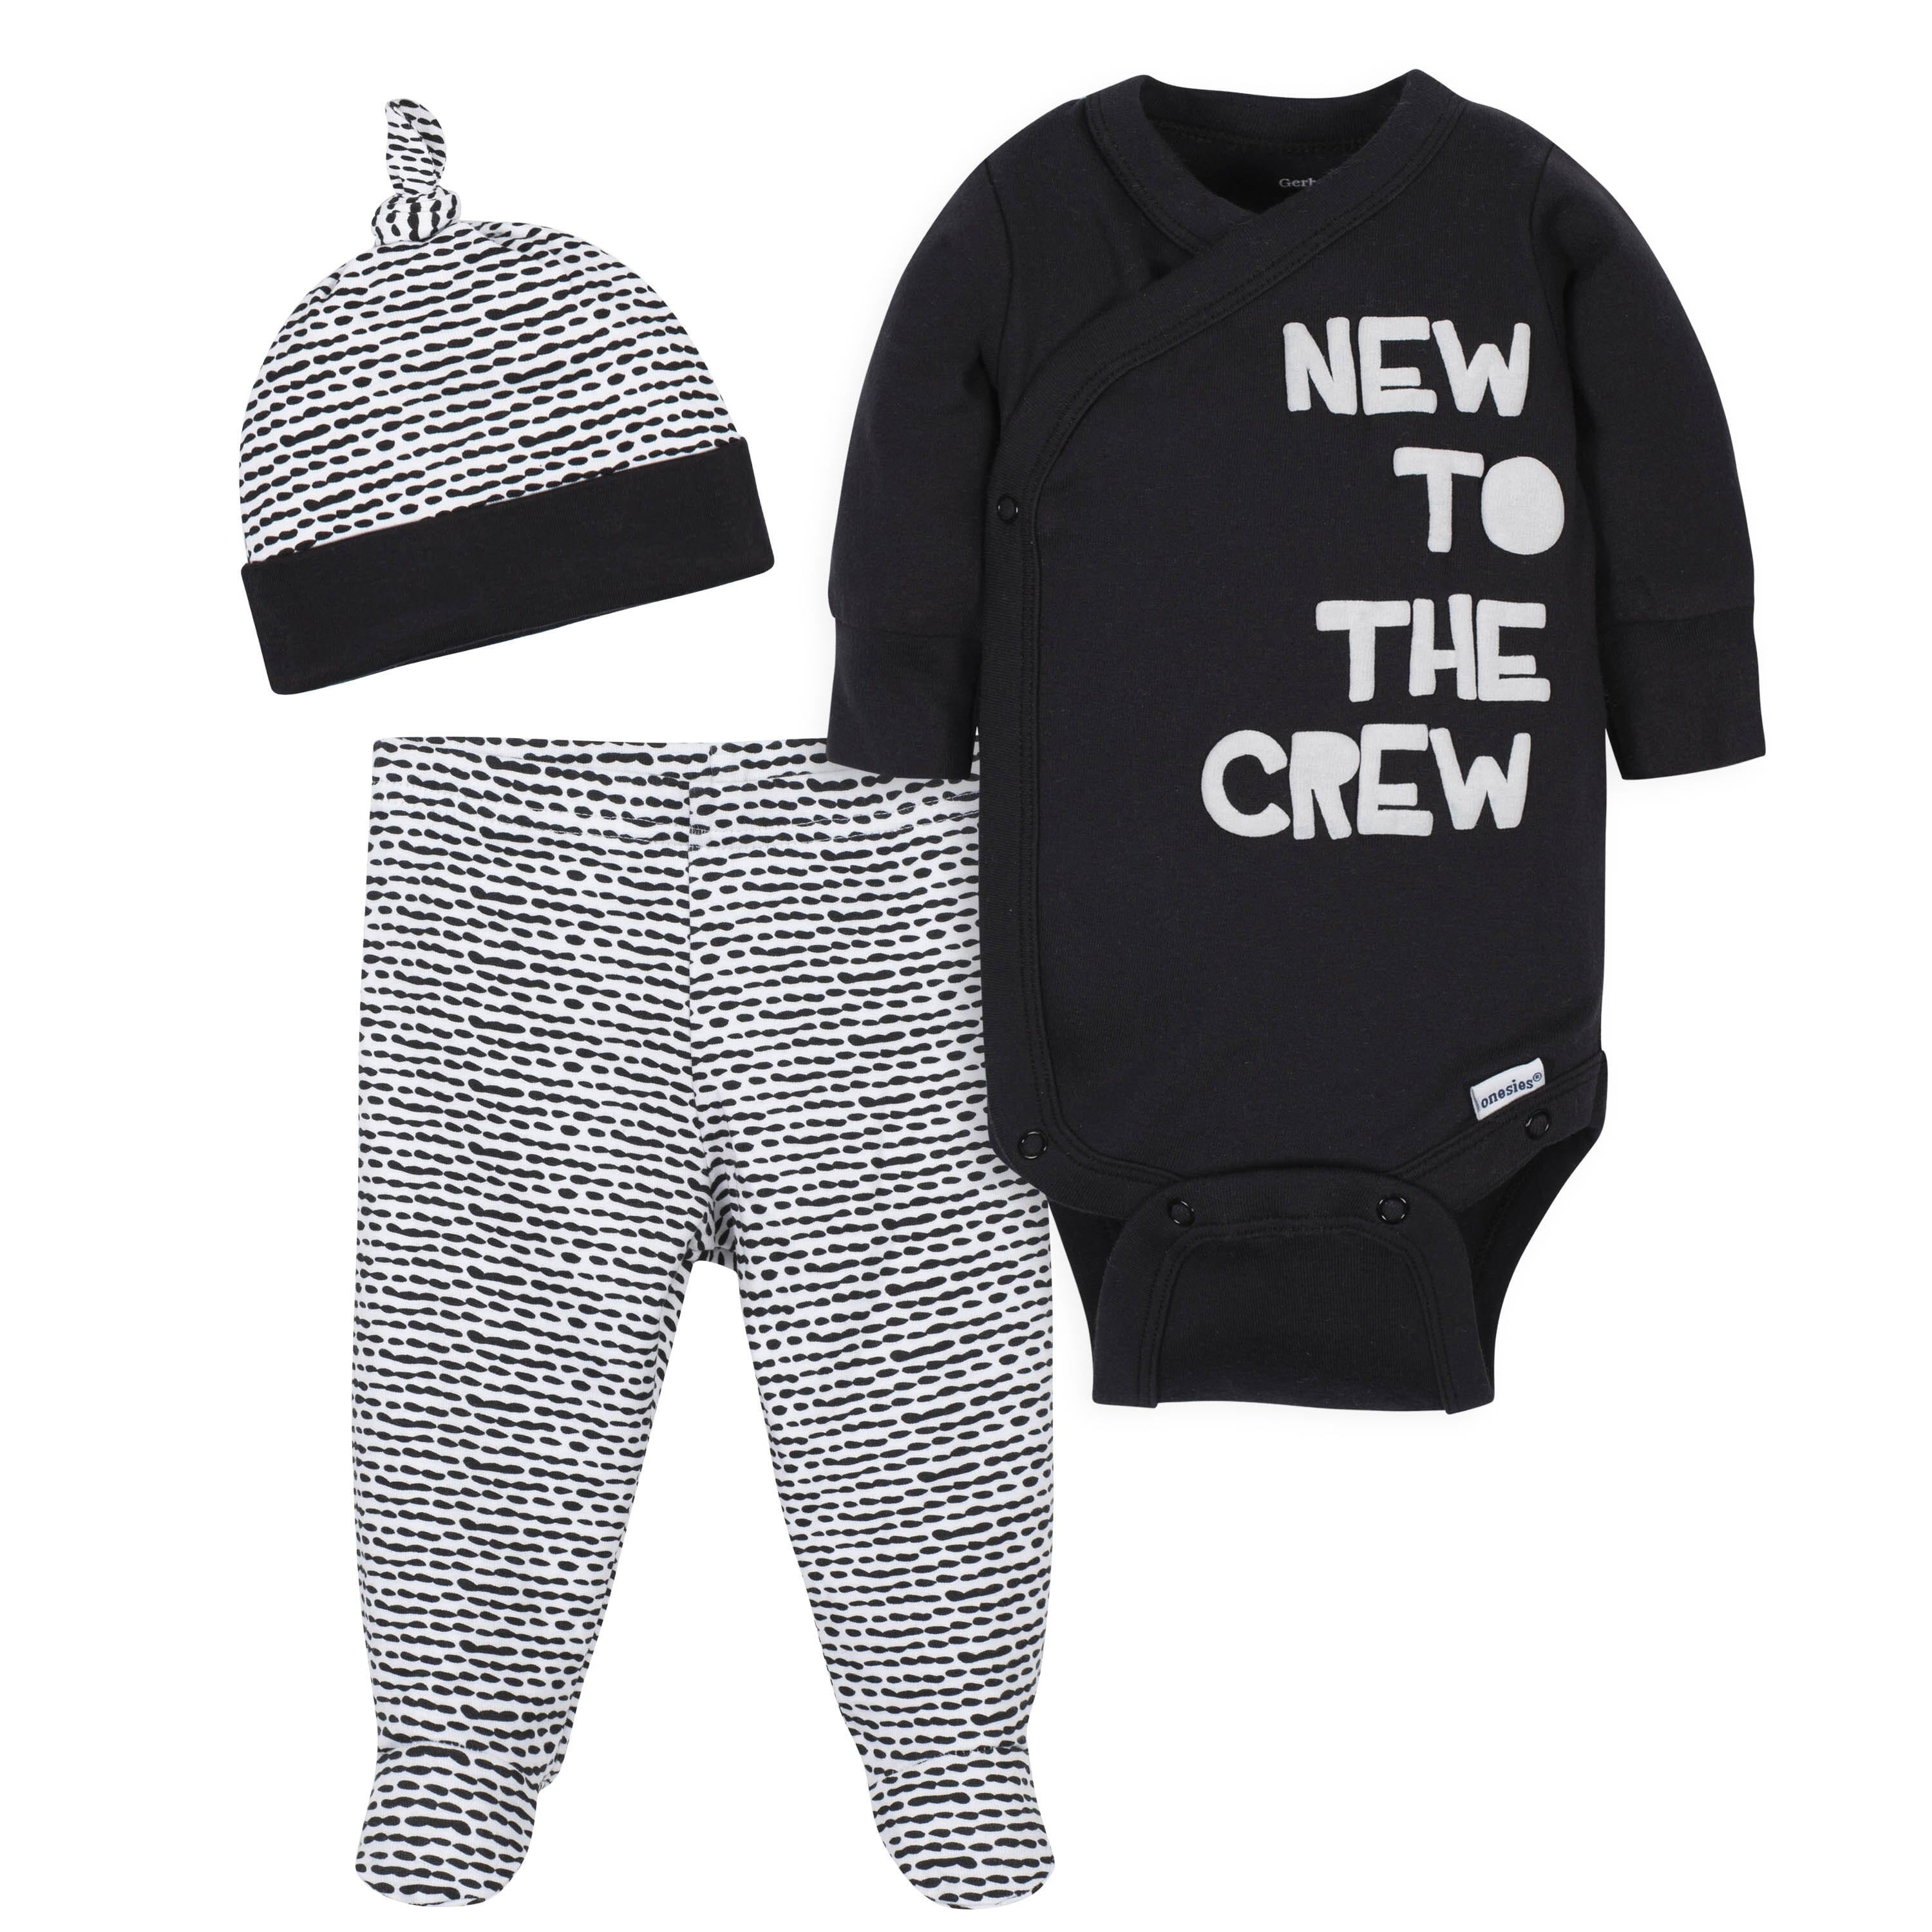 new to the crew baby outfit